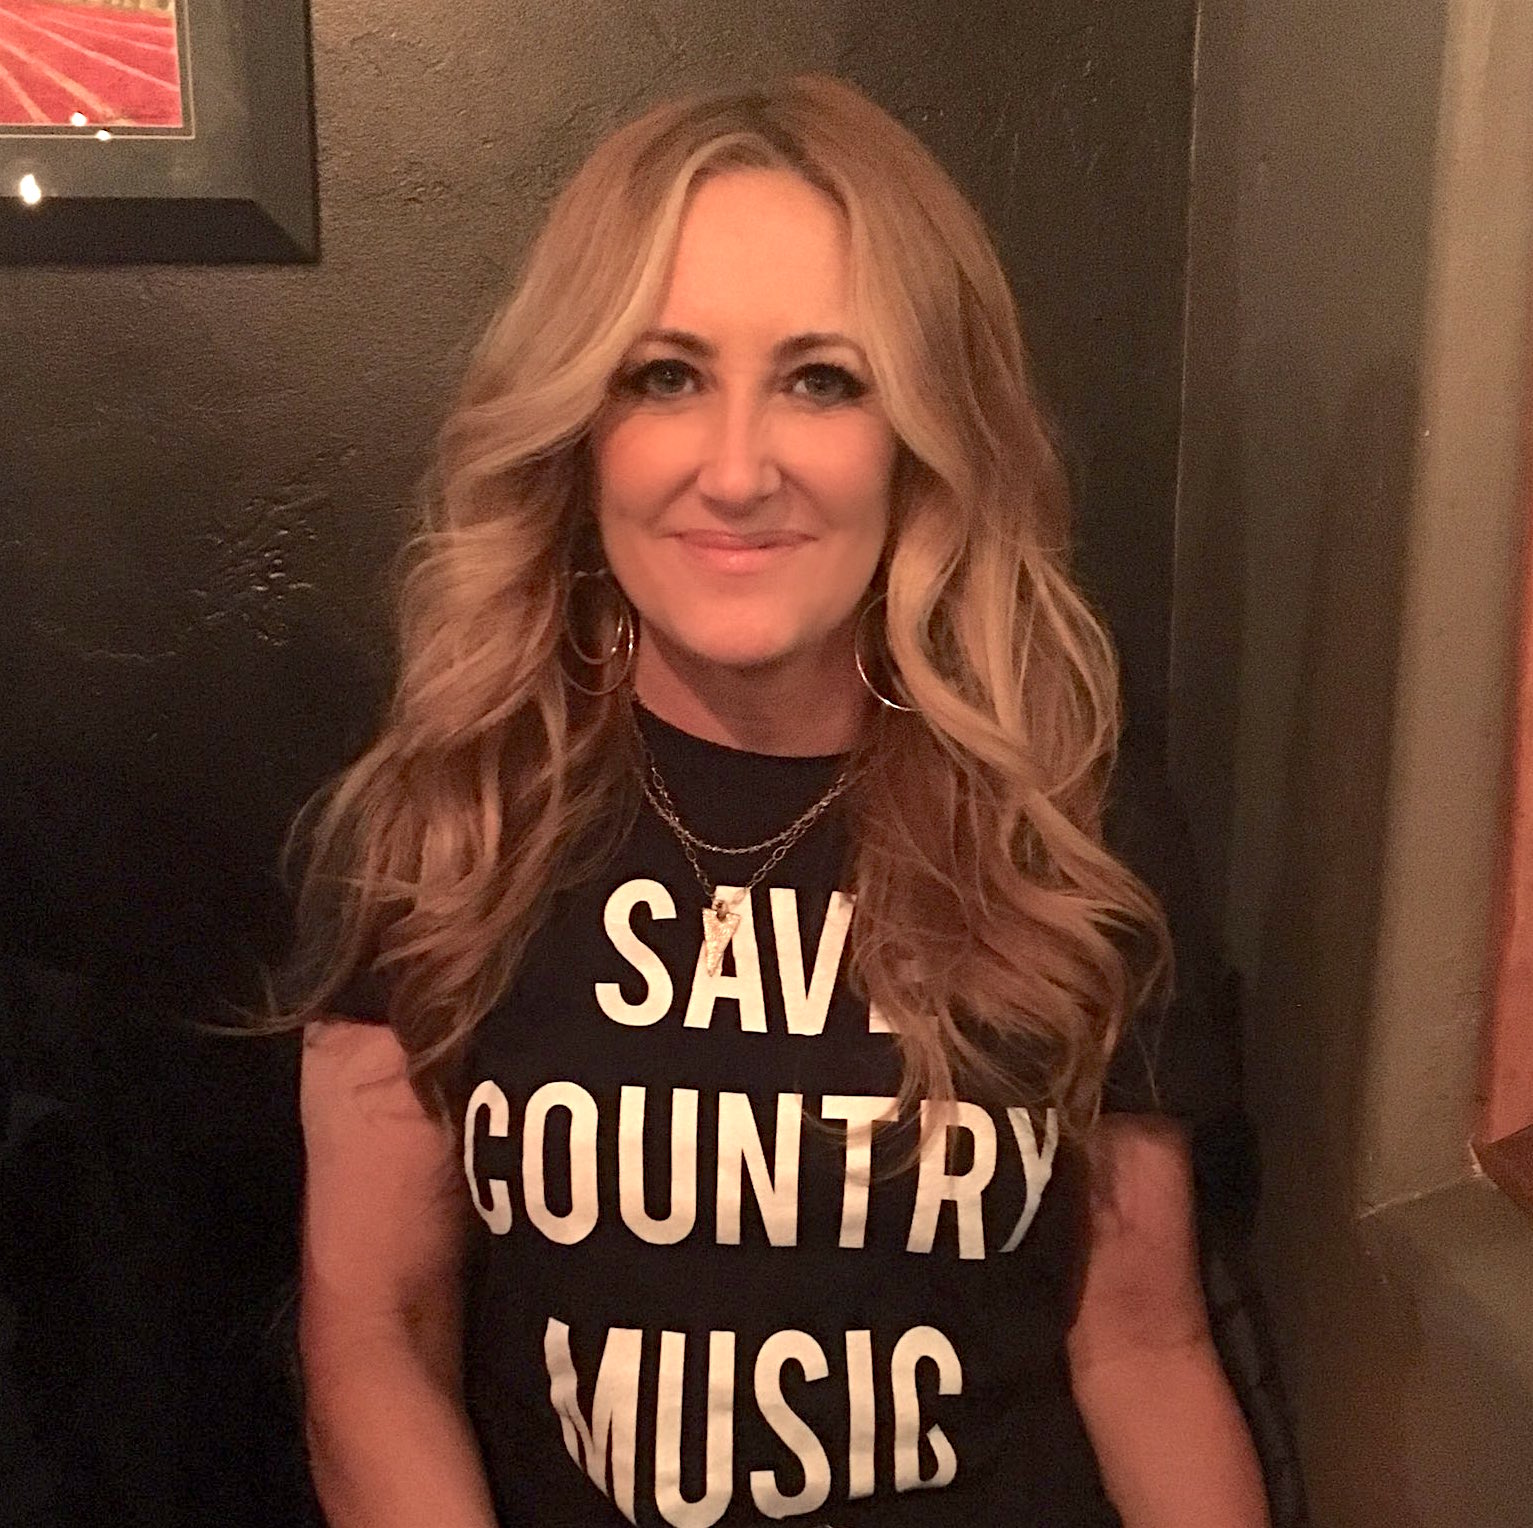 The Perlich Post: Lee Ann Womack @ The Horseshoe, January 24